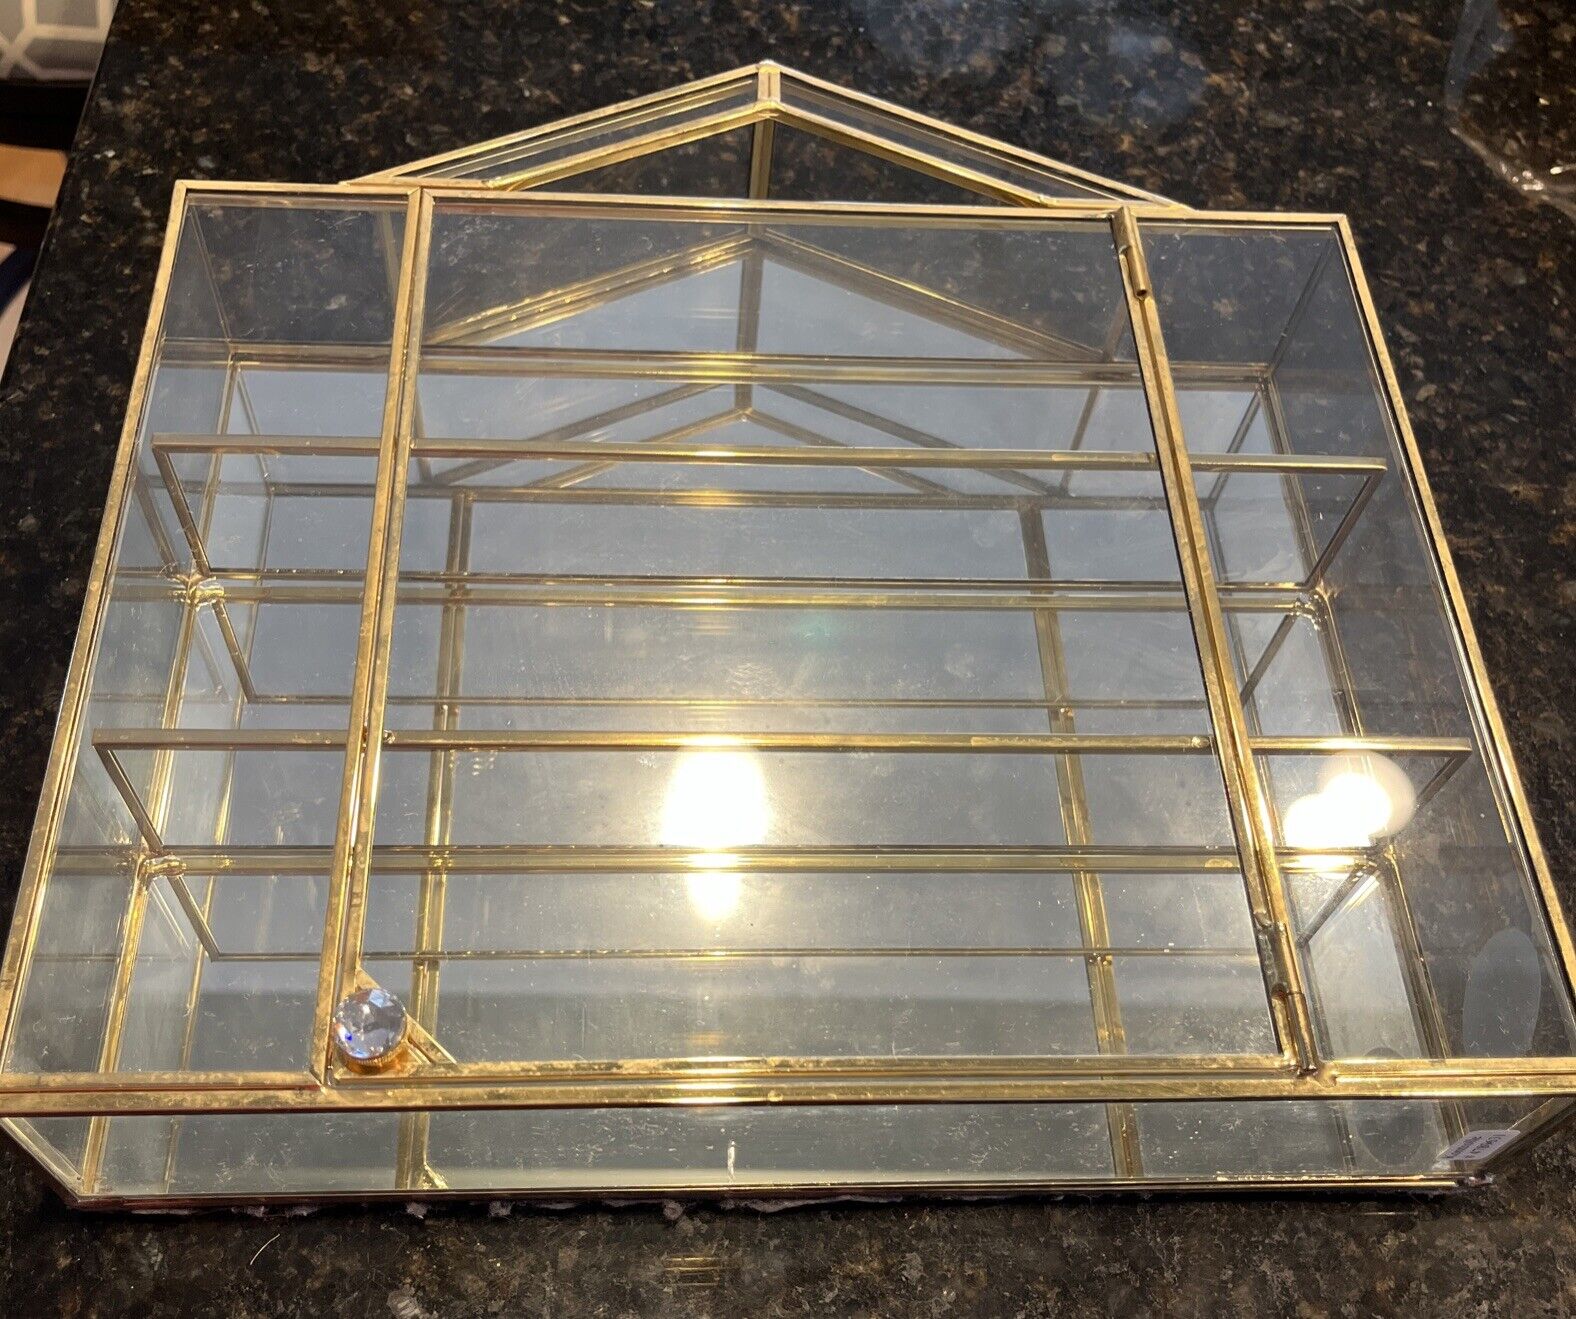 Swarovski Crystal Display Case With Gold Plated Edges And Crystal Knob 11x10.5